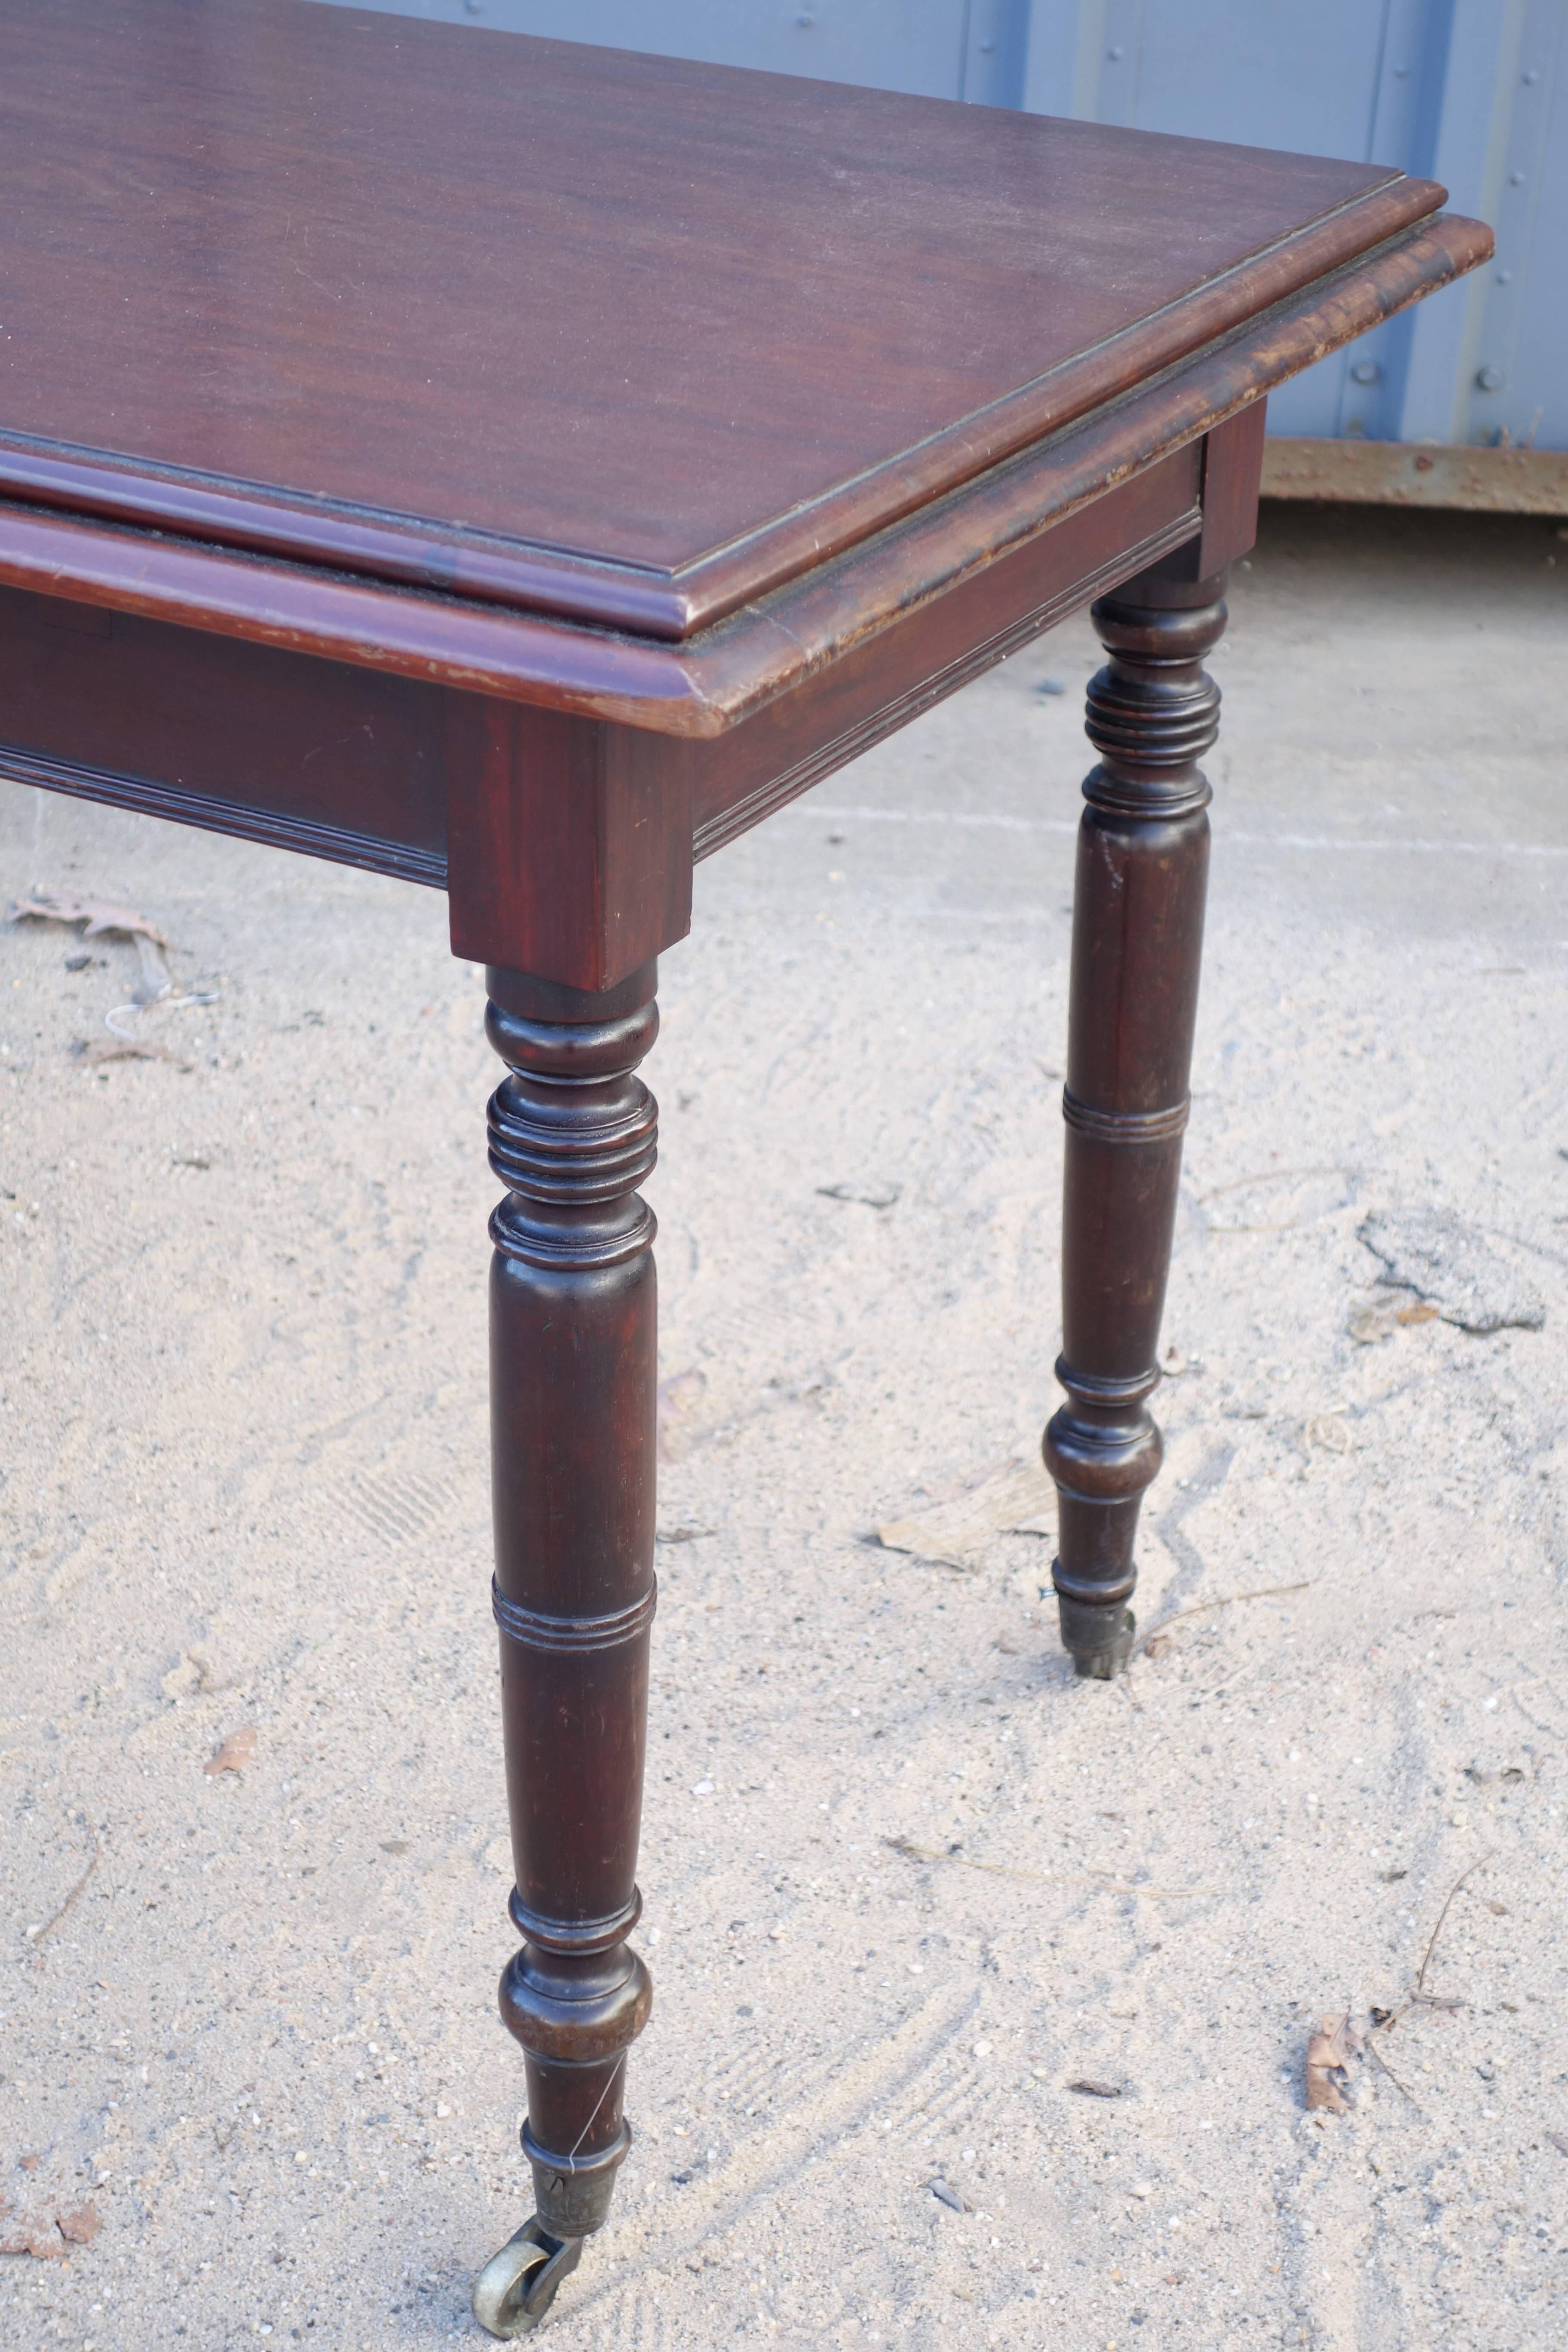 English mahogany writing table on casters, simple turned legs, nice color.